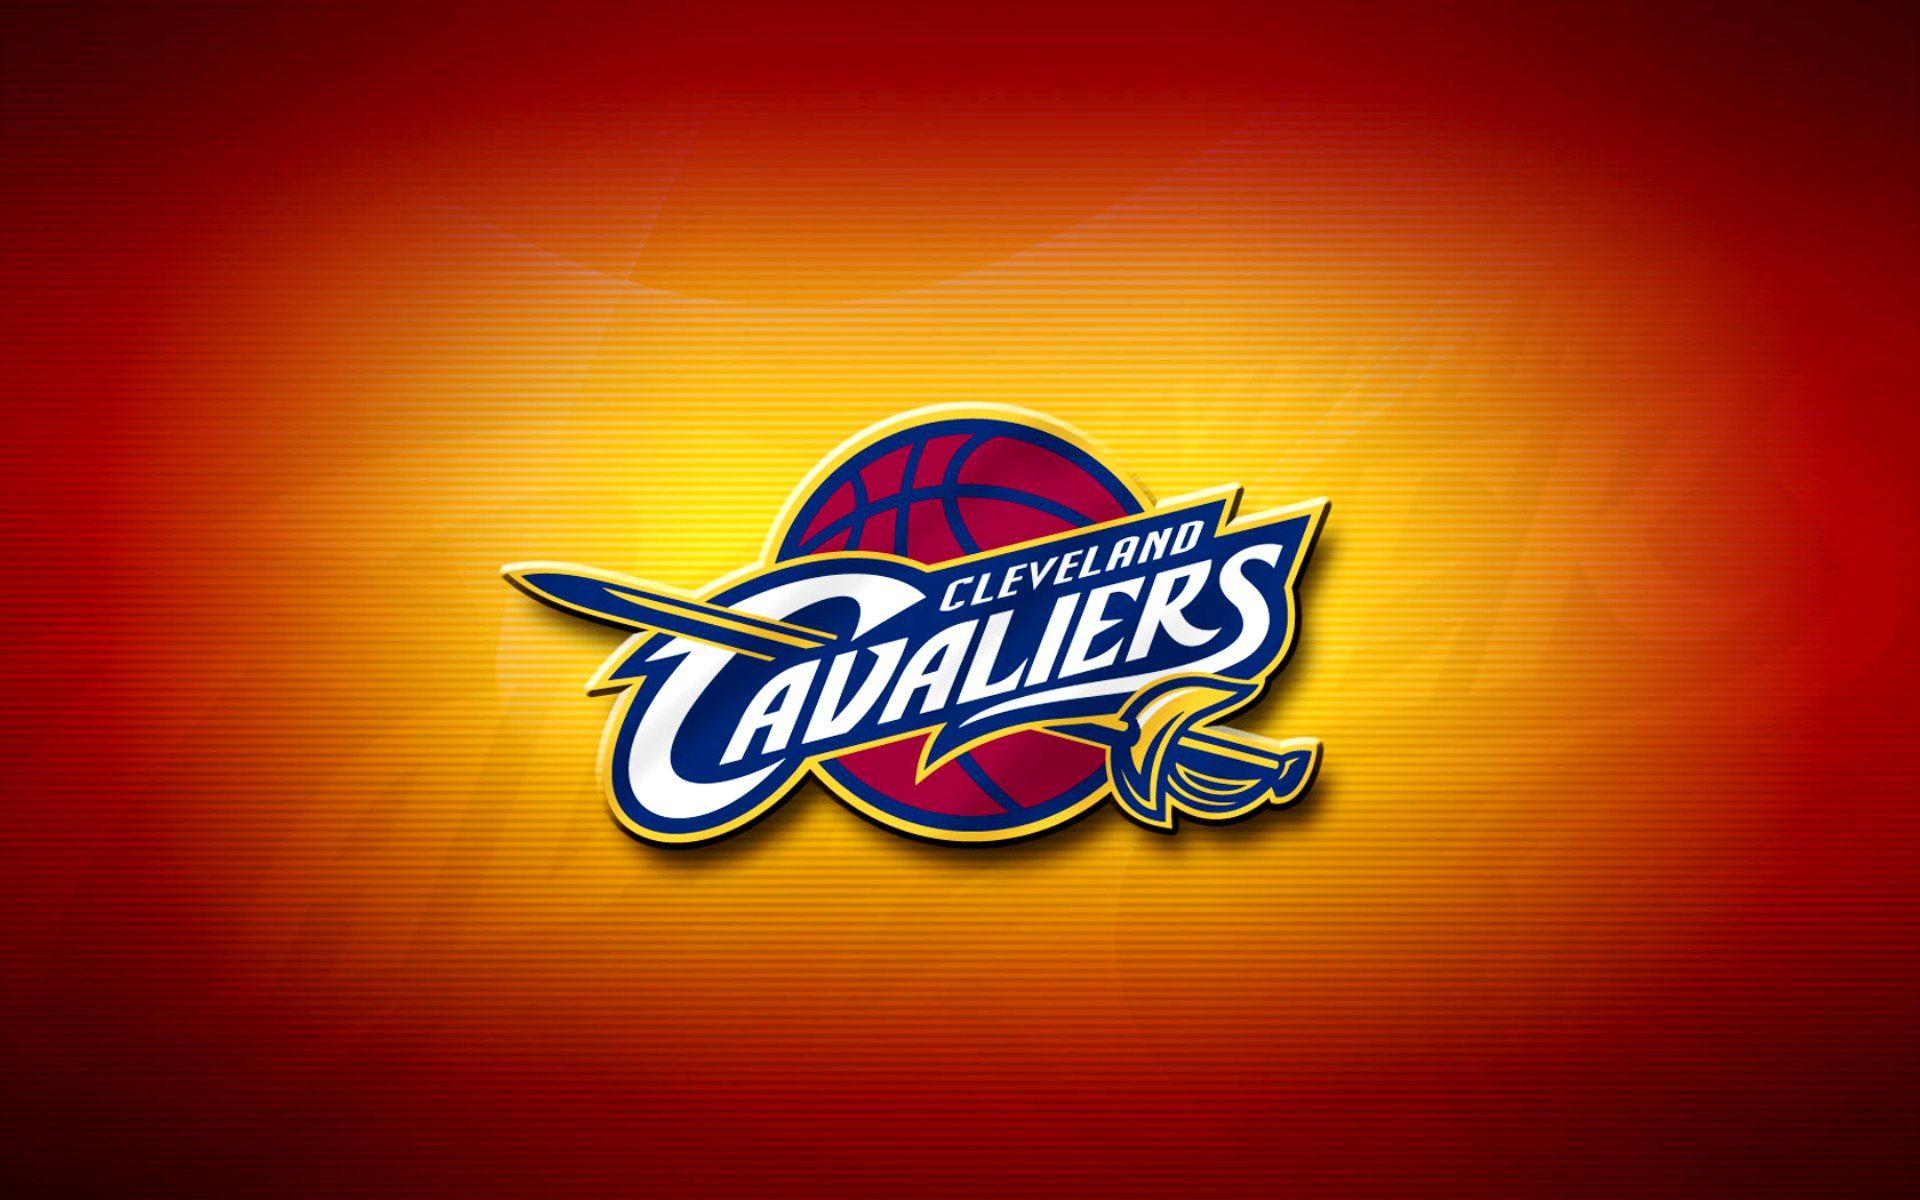 2023 Cleveland Cavaliers wallpaper – Pro Sports Backgrounds